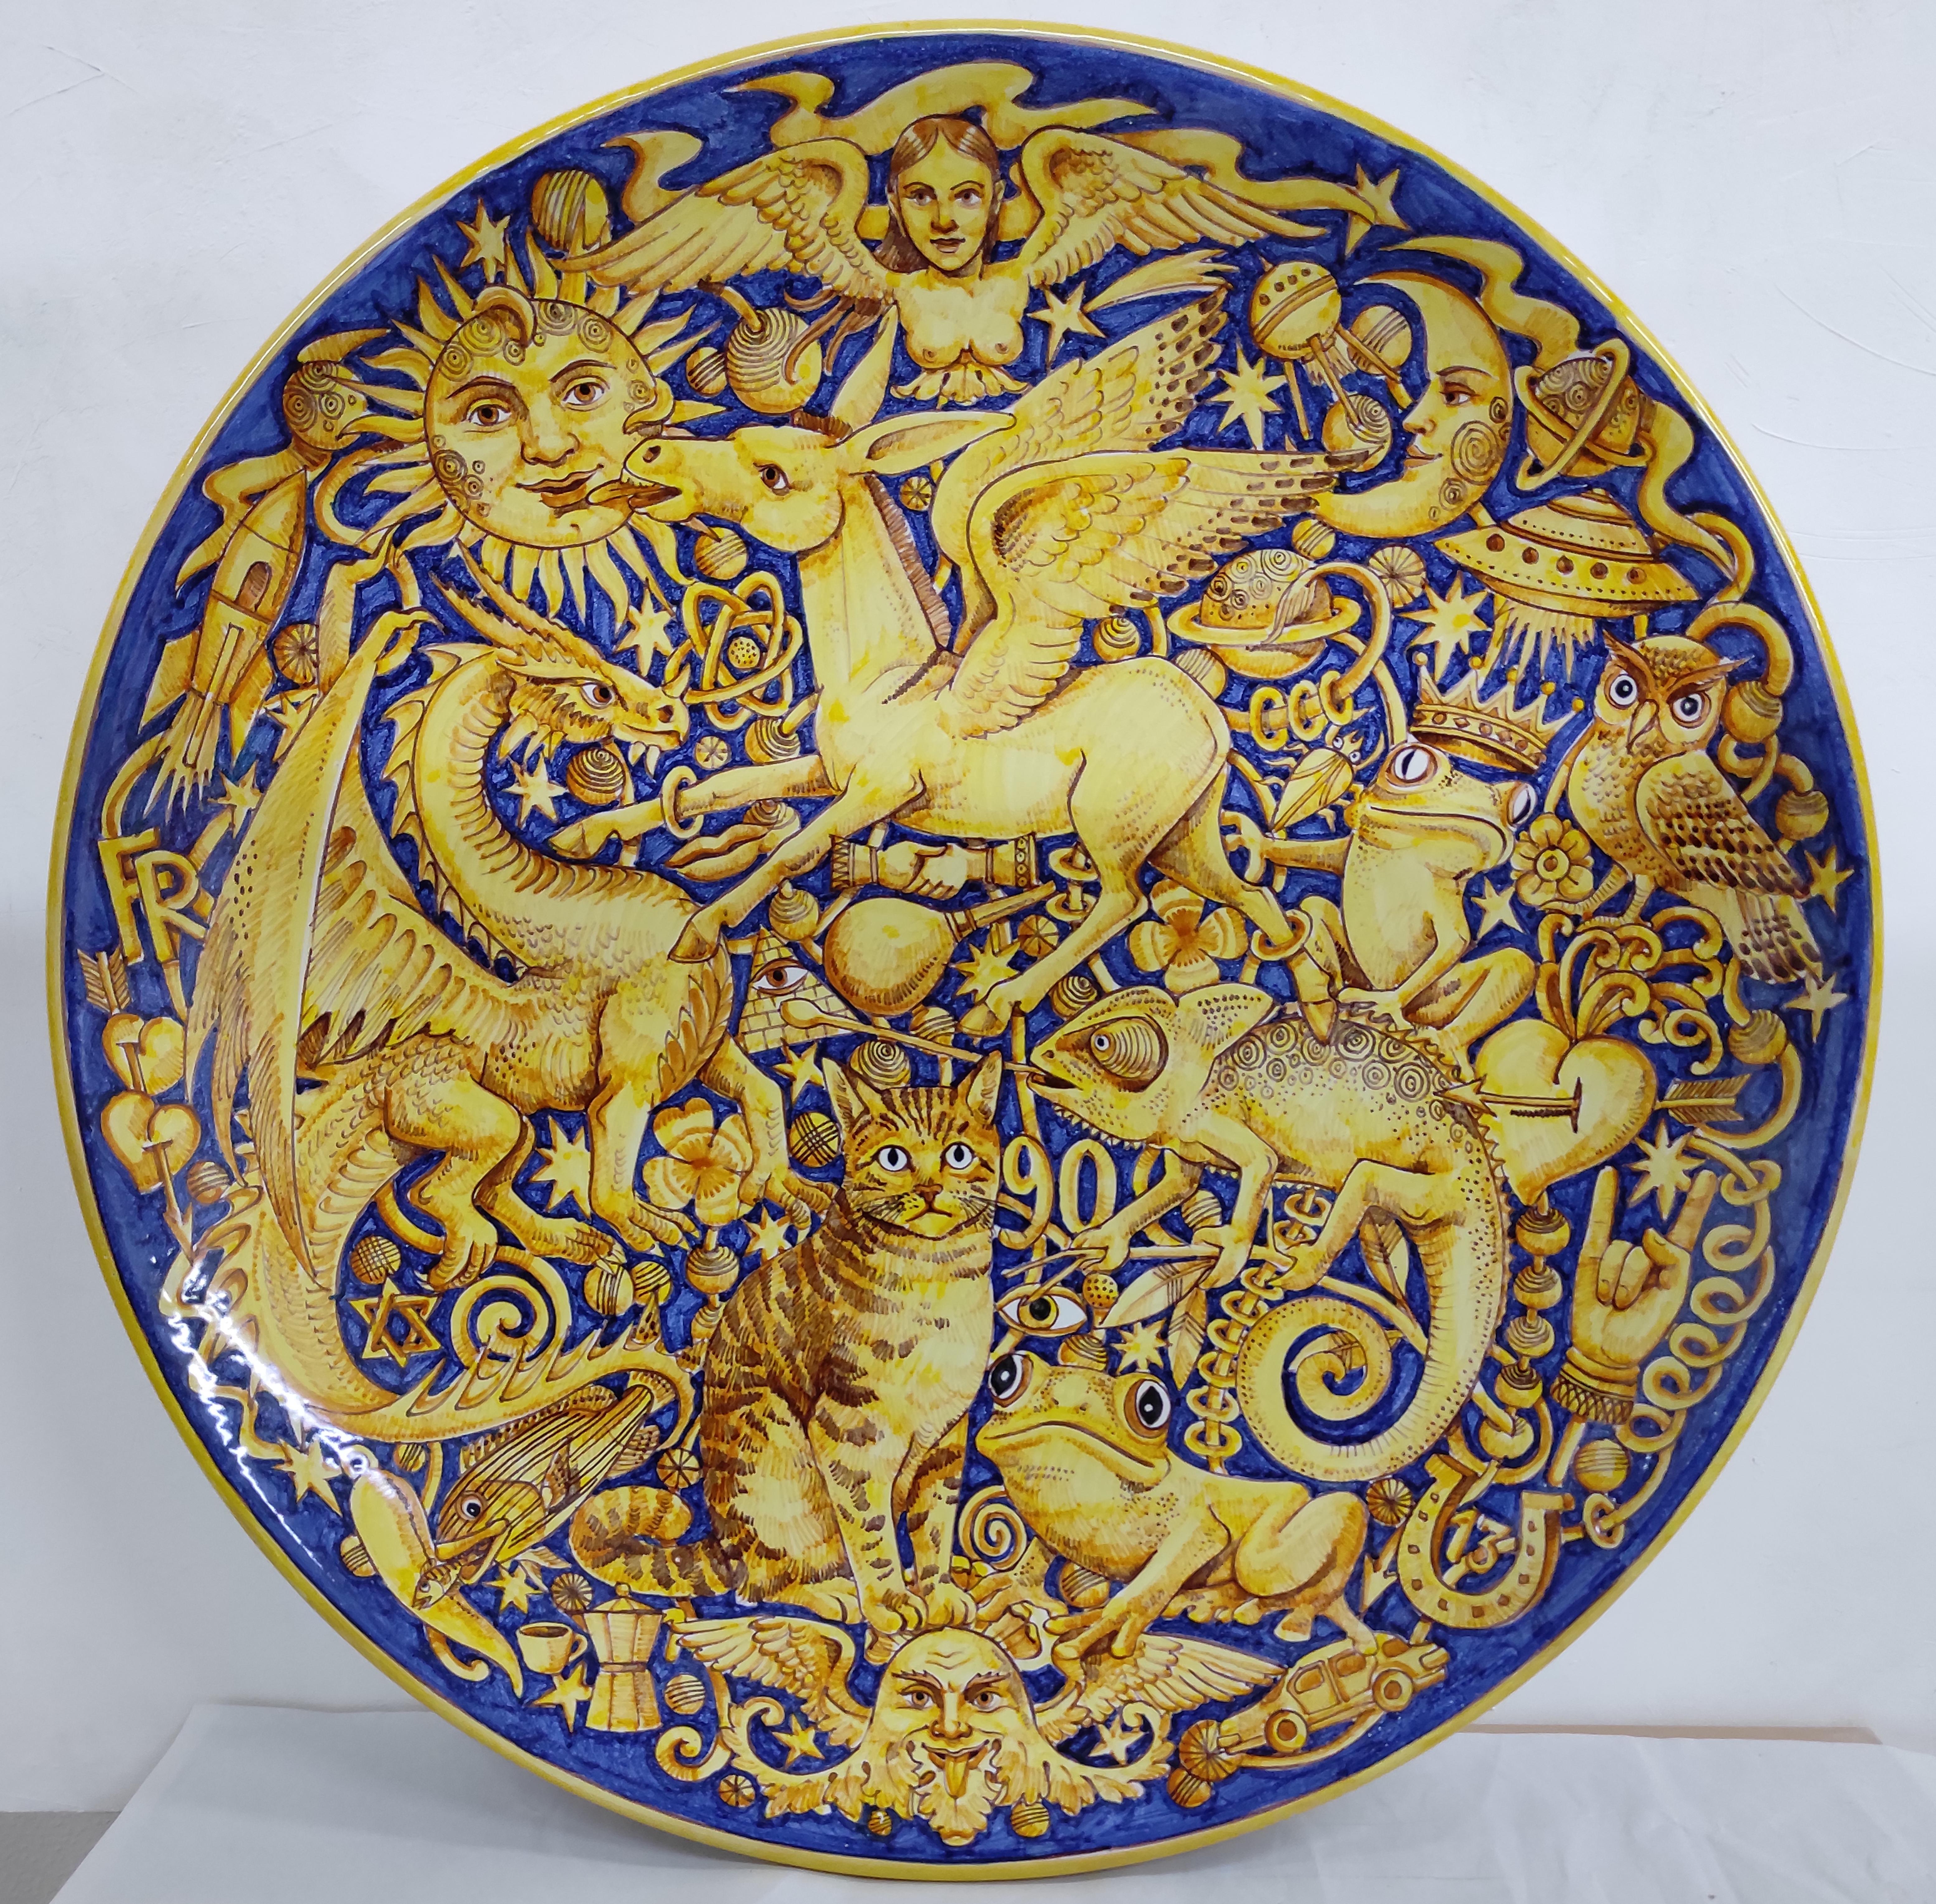 Francesco Raimondi, Grotesque plate, 2020 glazed earthenware 60cm diameter - hand painted, unique piece 

Francesco Raimondi was born in 1959 in Vietri sul Mare on the Amalfi coast, where he currently lives and works. A decorative artist by